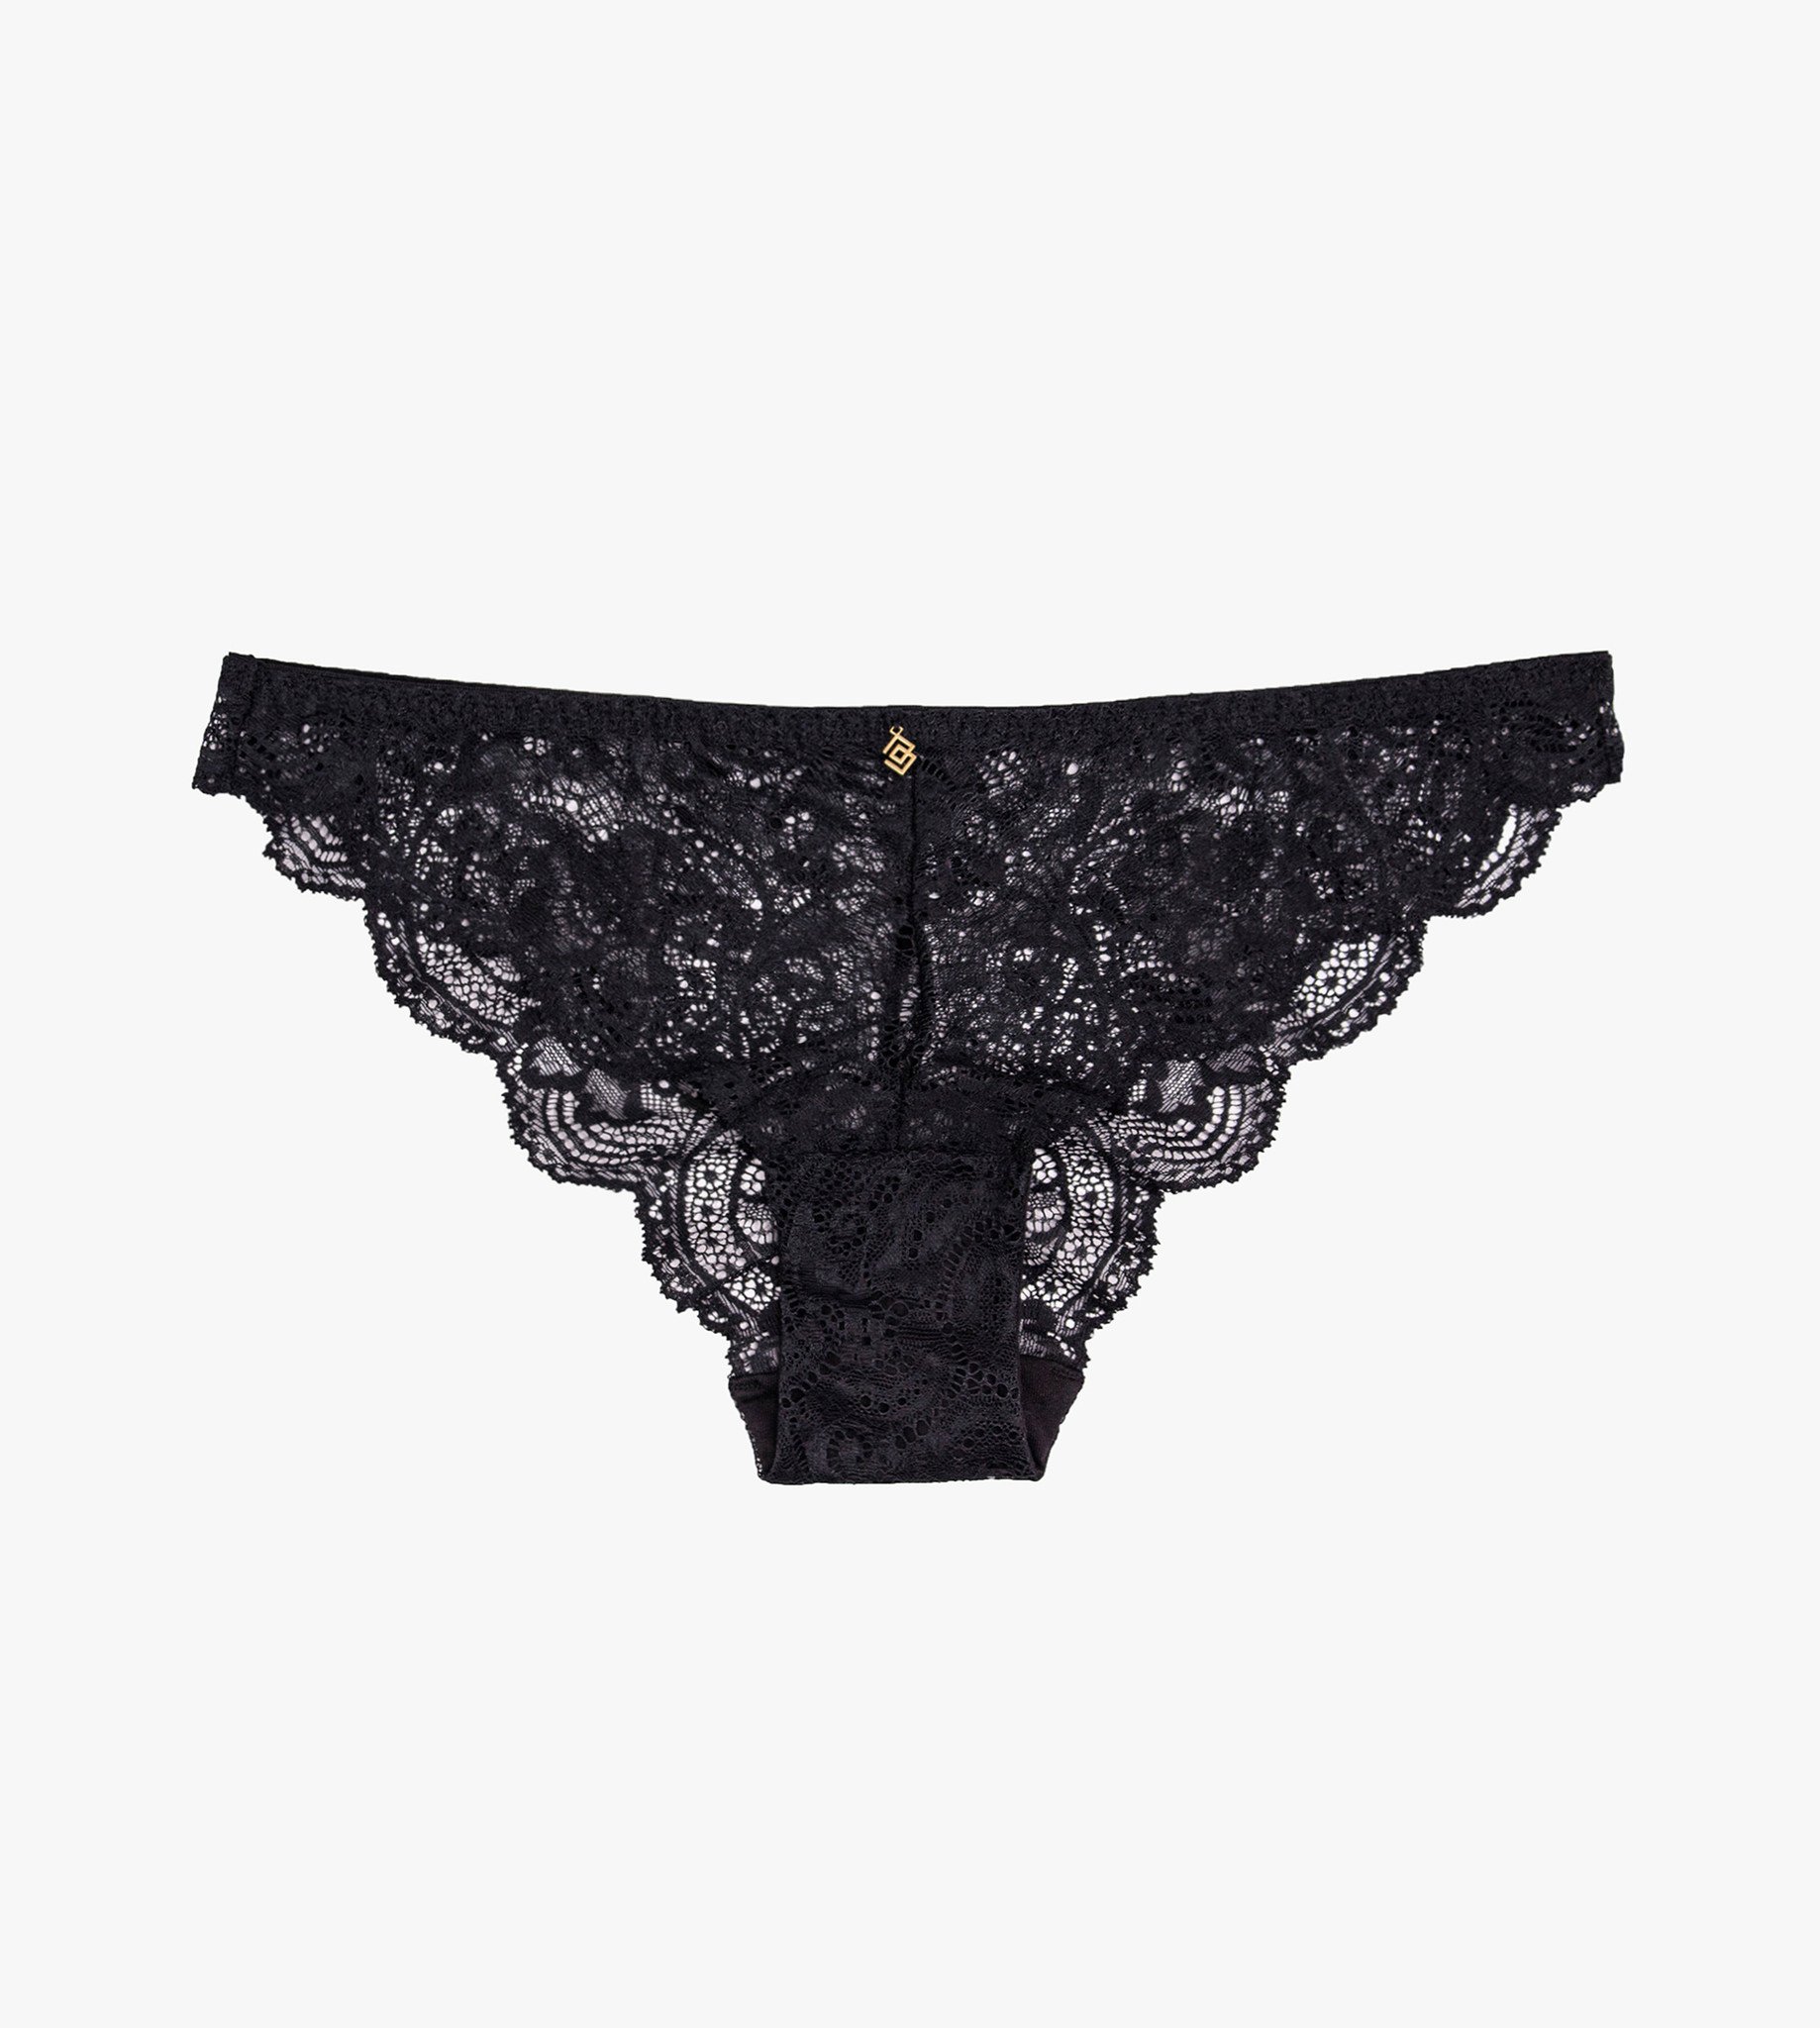 All-Lace Cheeky Lingerie – ThirdLove